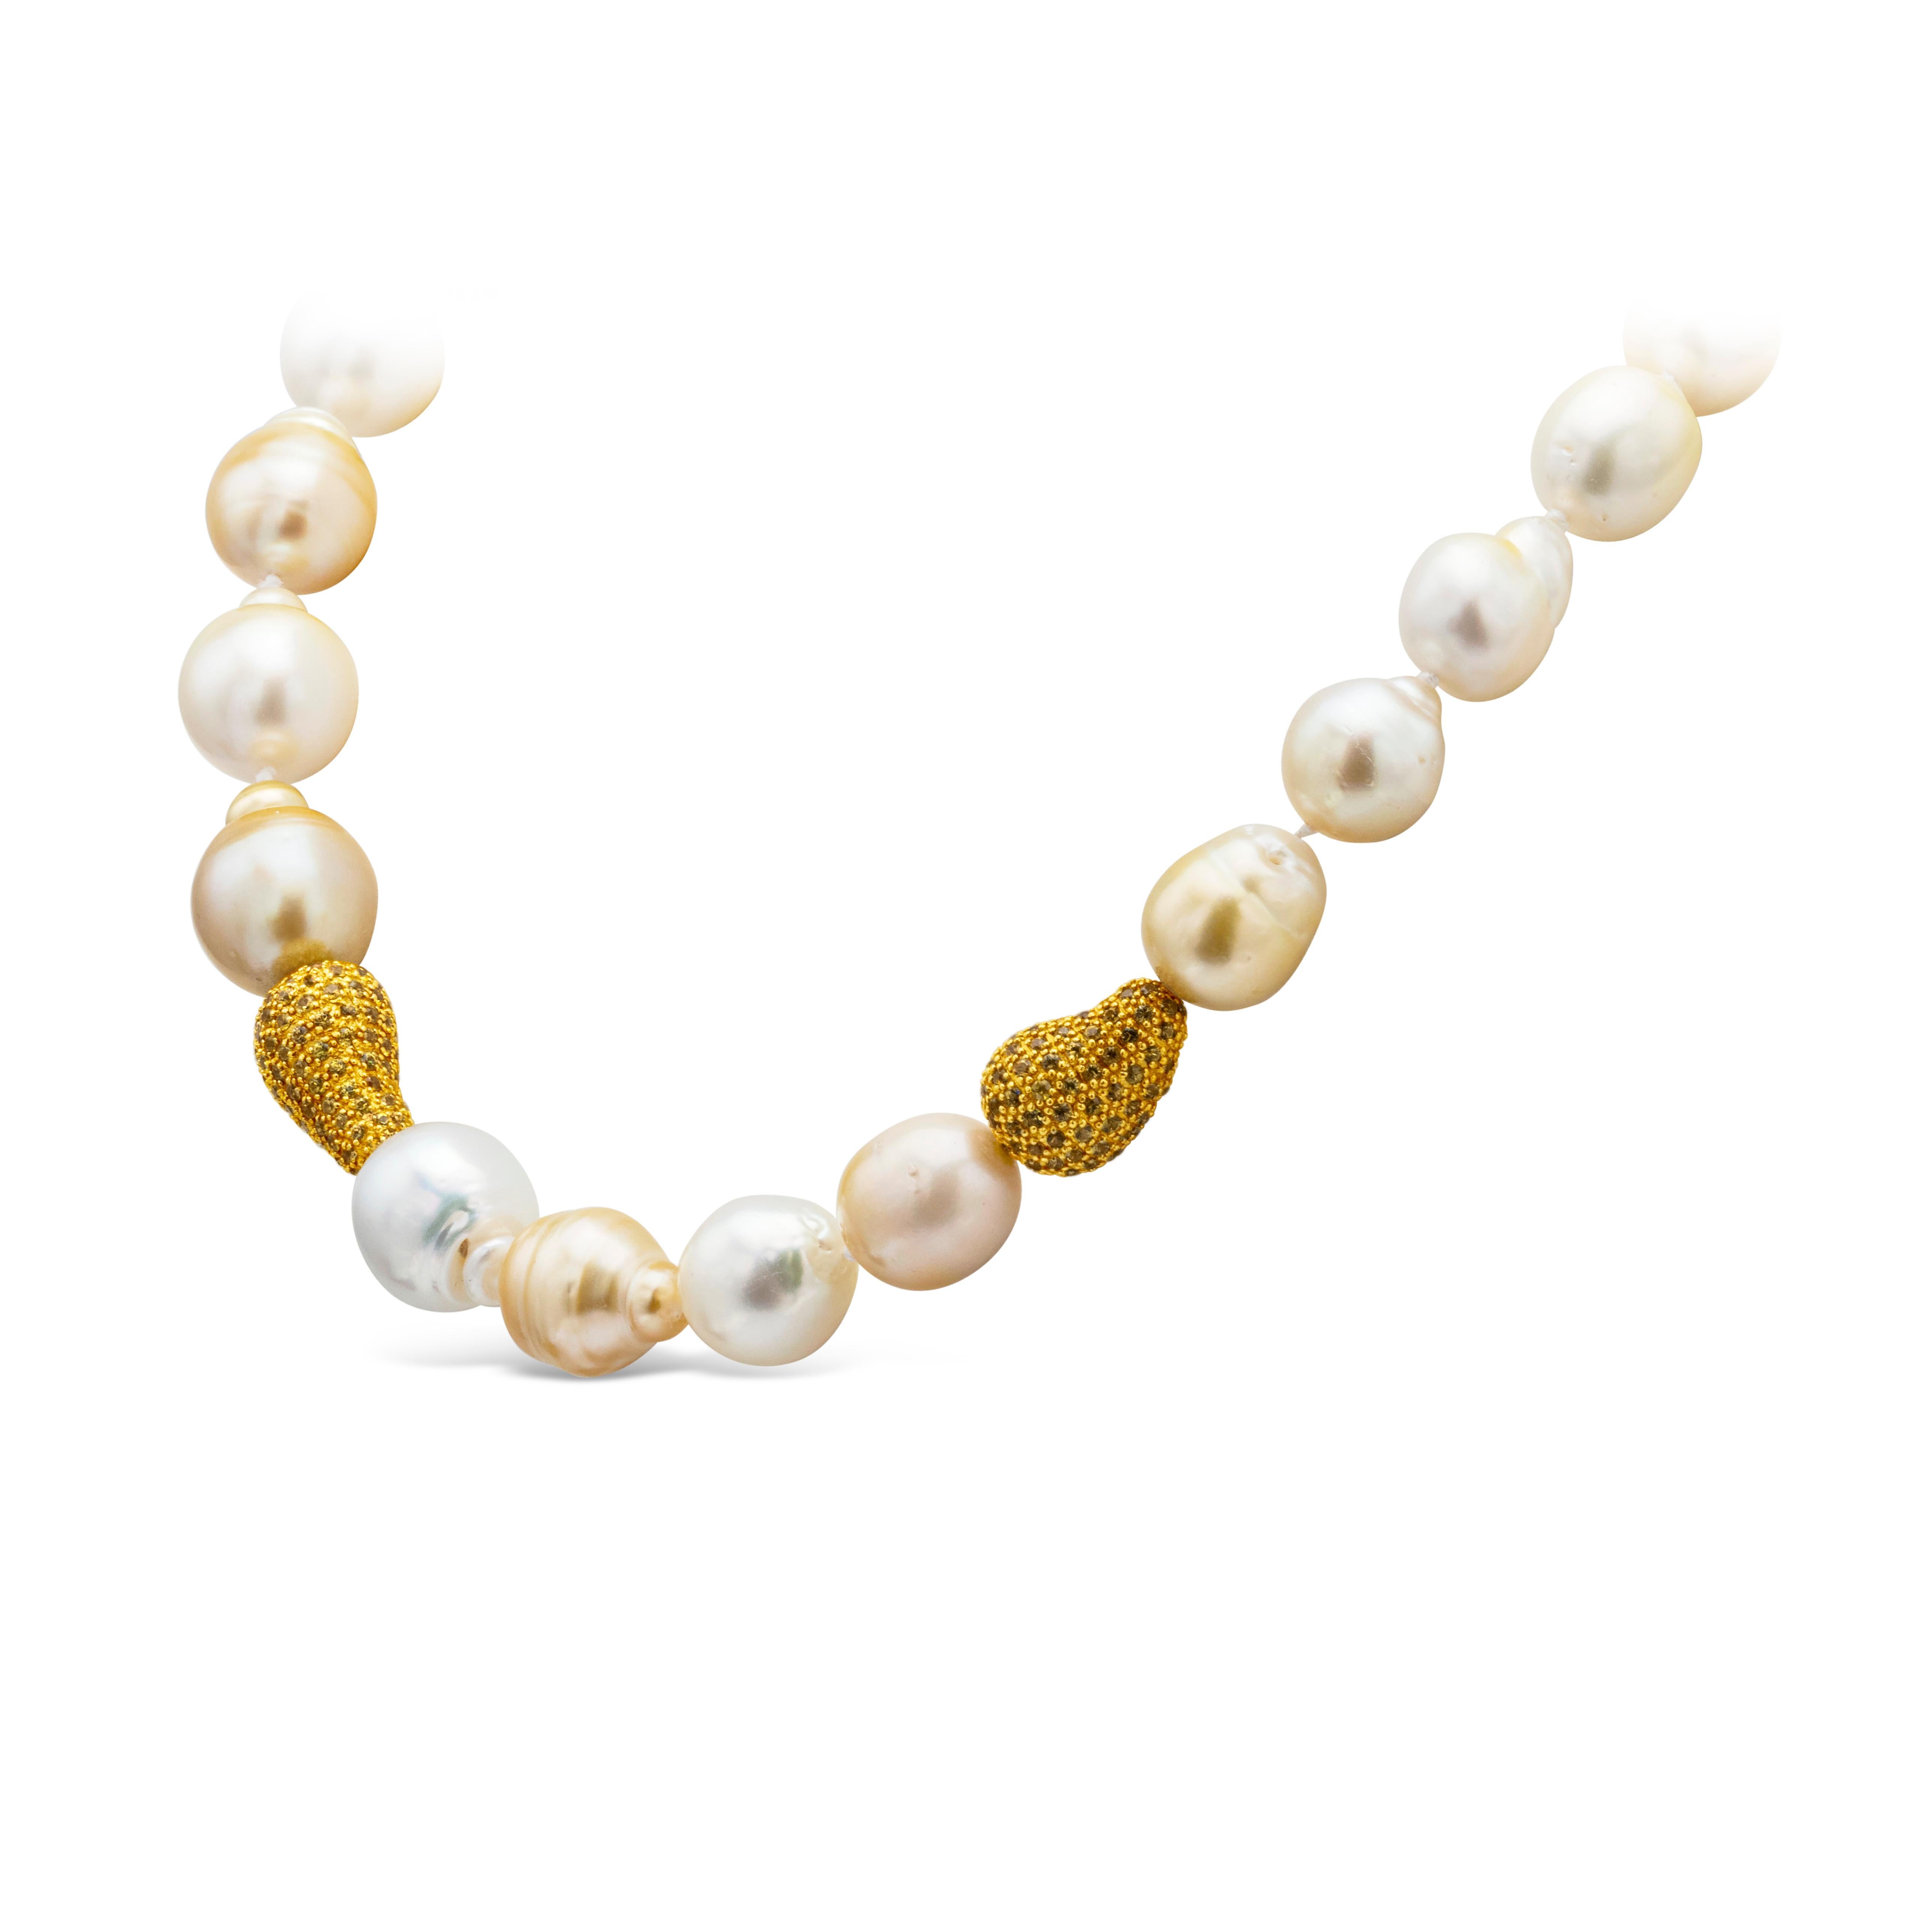 Magnificent necklace showcases 22 pieces of South Sea golden and white baroque Pearls. These beautiful pearls are approximately 12.2-15.3mm diameter and Perfectly offset by the yellow sapphire pave clasps.

Roman Malakov is a custom house,